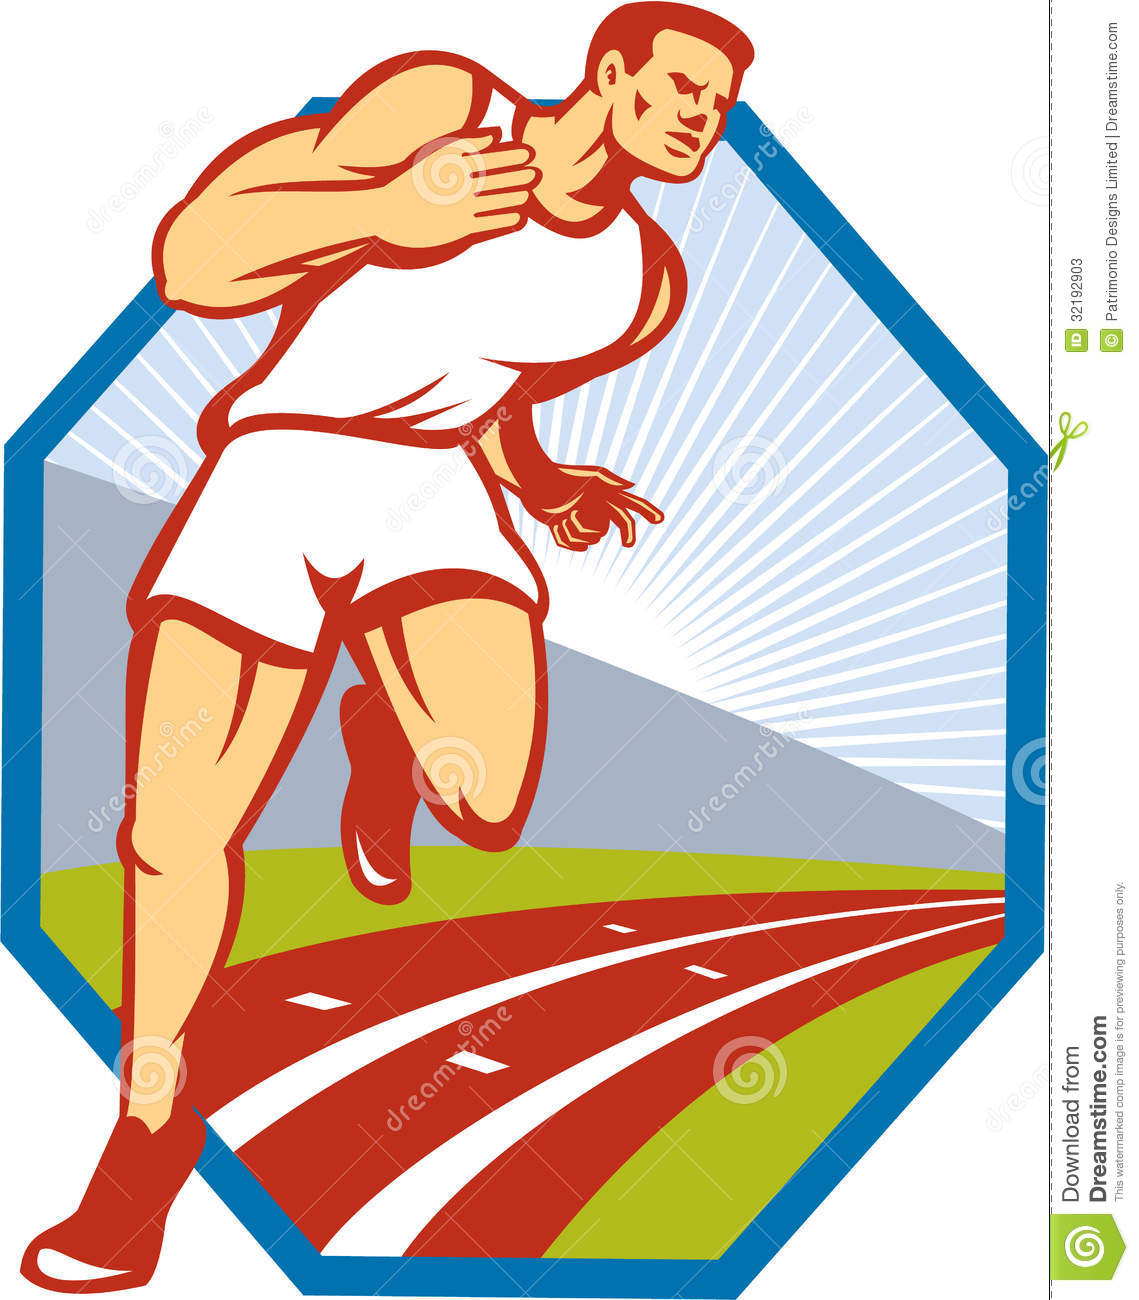 Athlete Running On Race Track Done In Retro Style Set Inside Hexagon